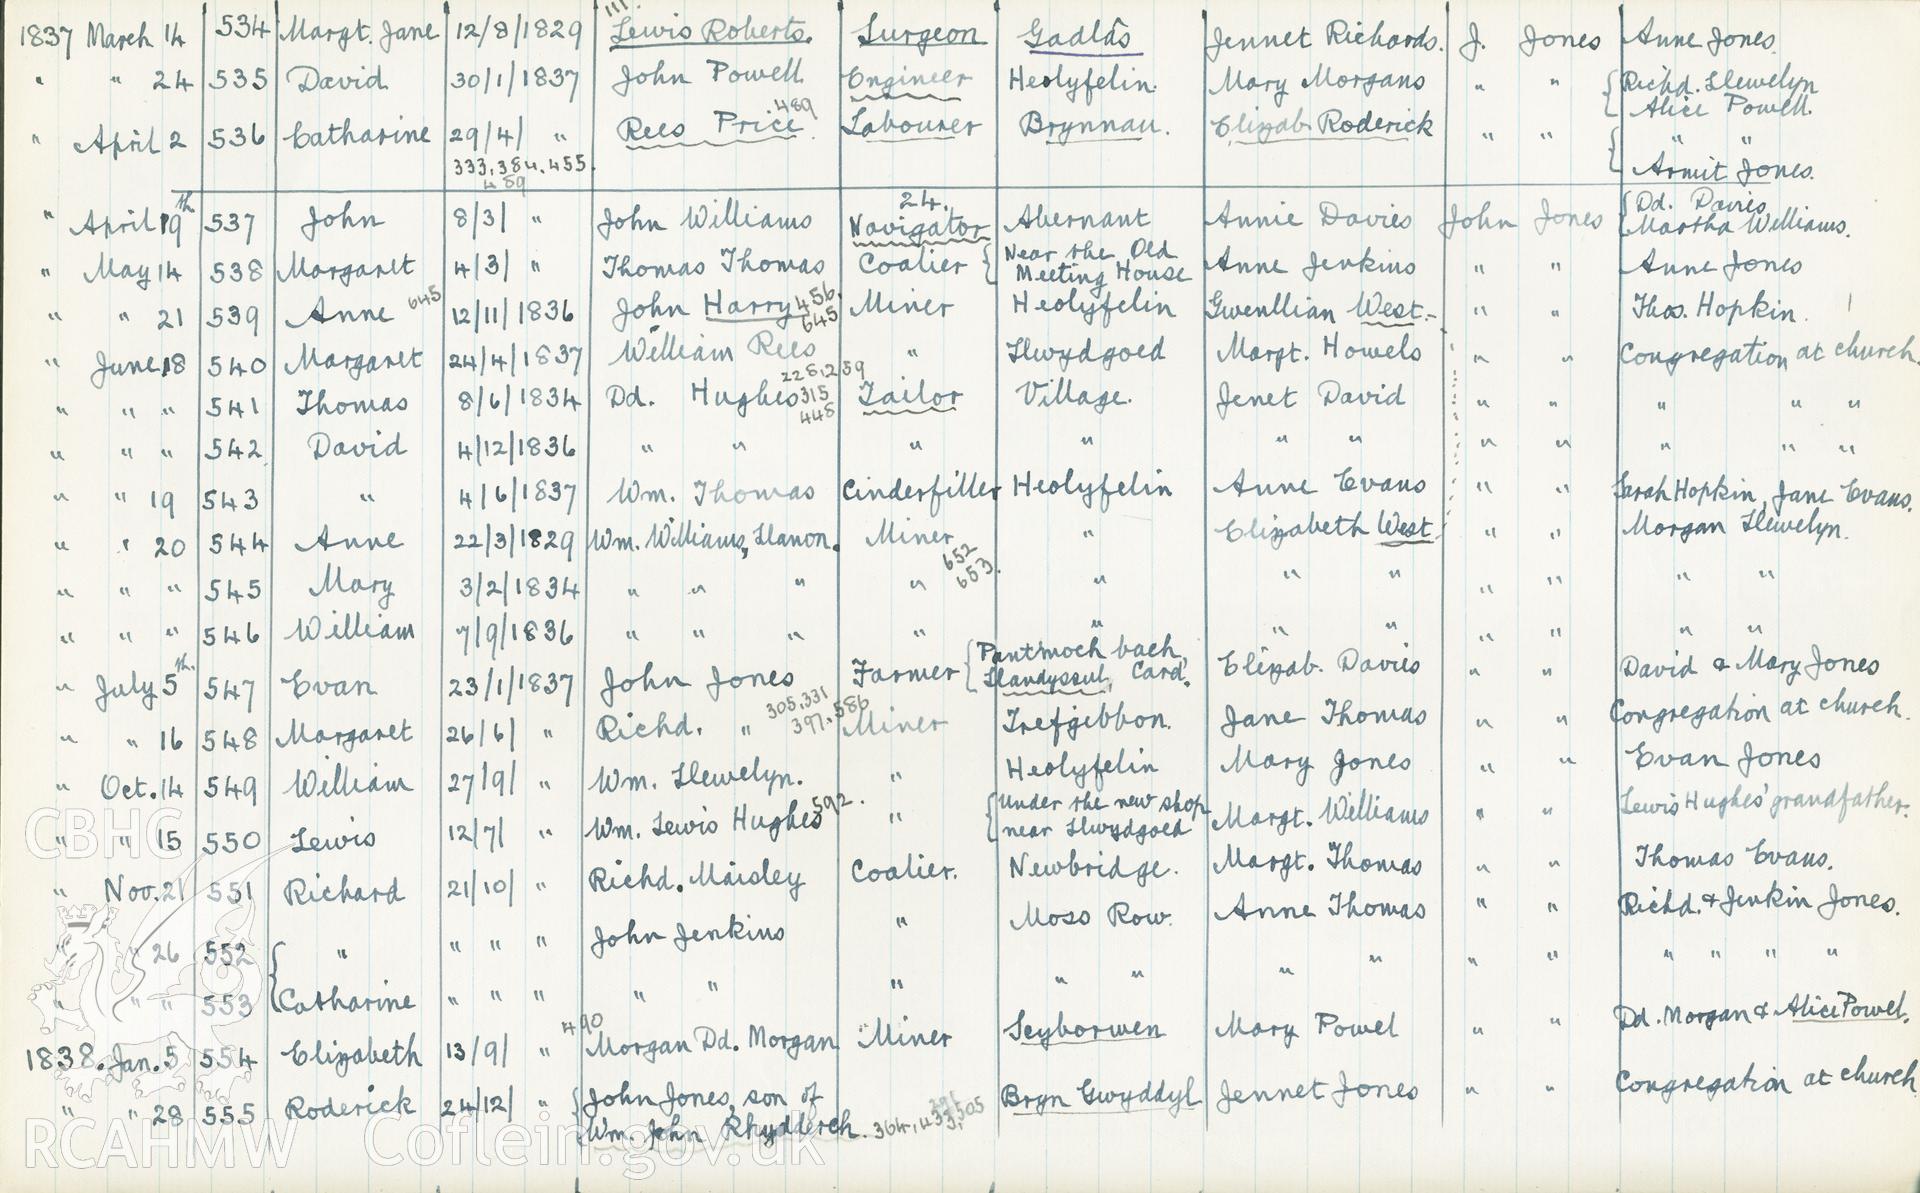 "Baptism Registered" book for Hen Dy Cwrdd, made between April 19th and 28th, 1941, by W. W. Price. Page listing baptisms from 14th March 1837 to 28th January 1838. Donated to the RCAHMW as part of the Digital Dissent Project.